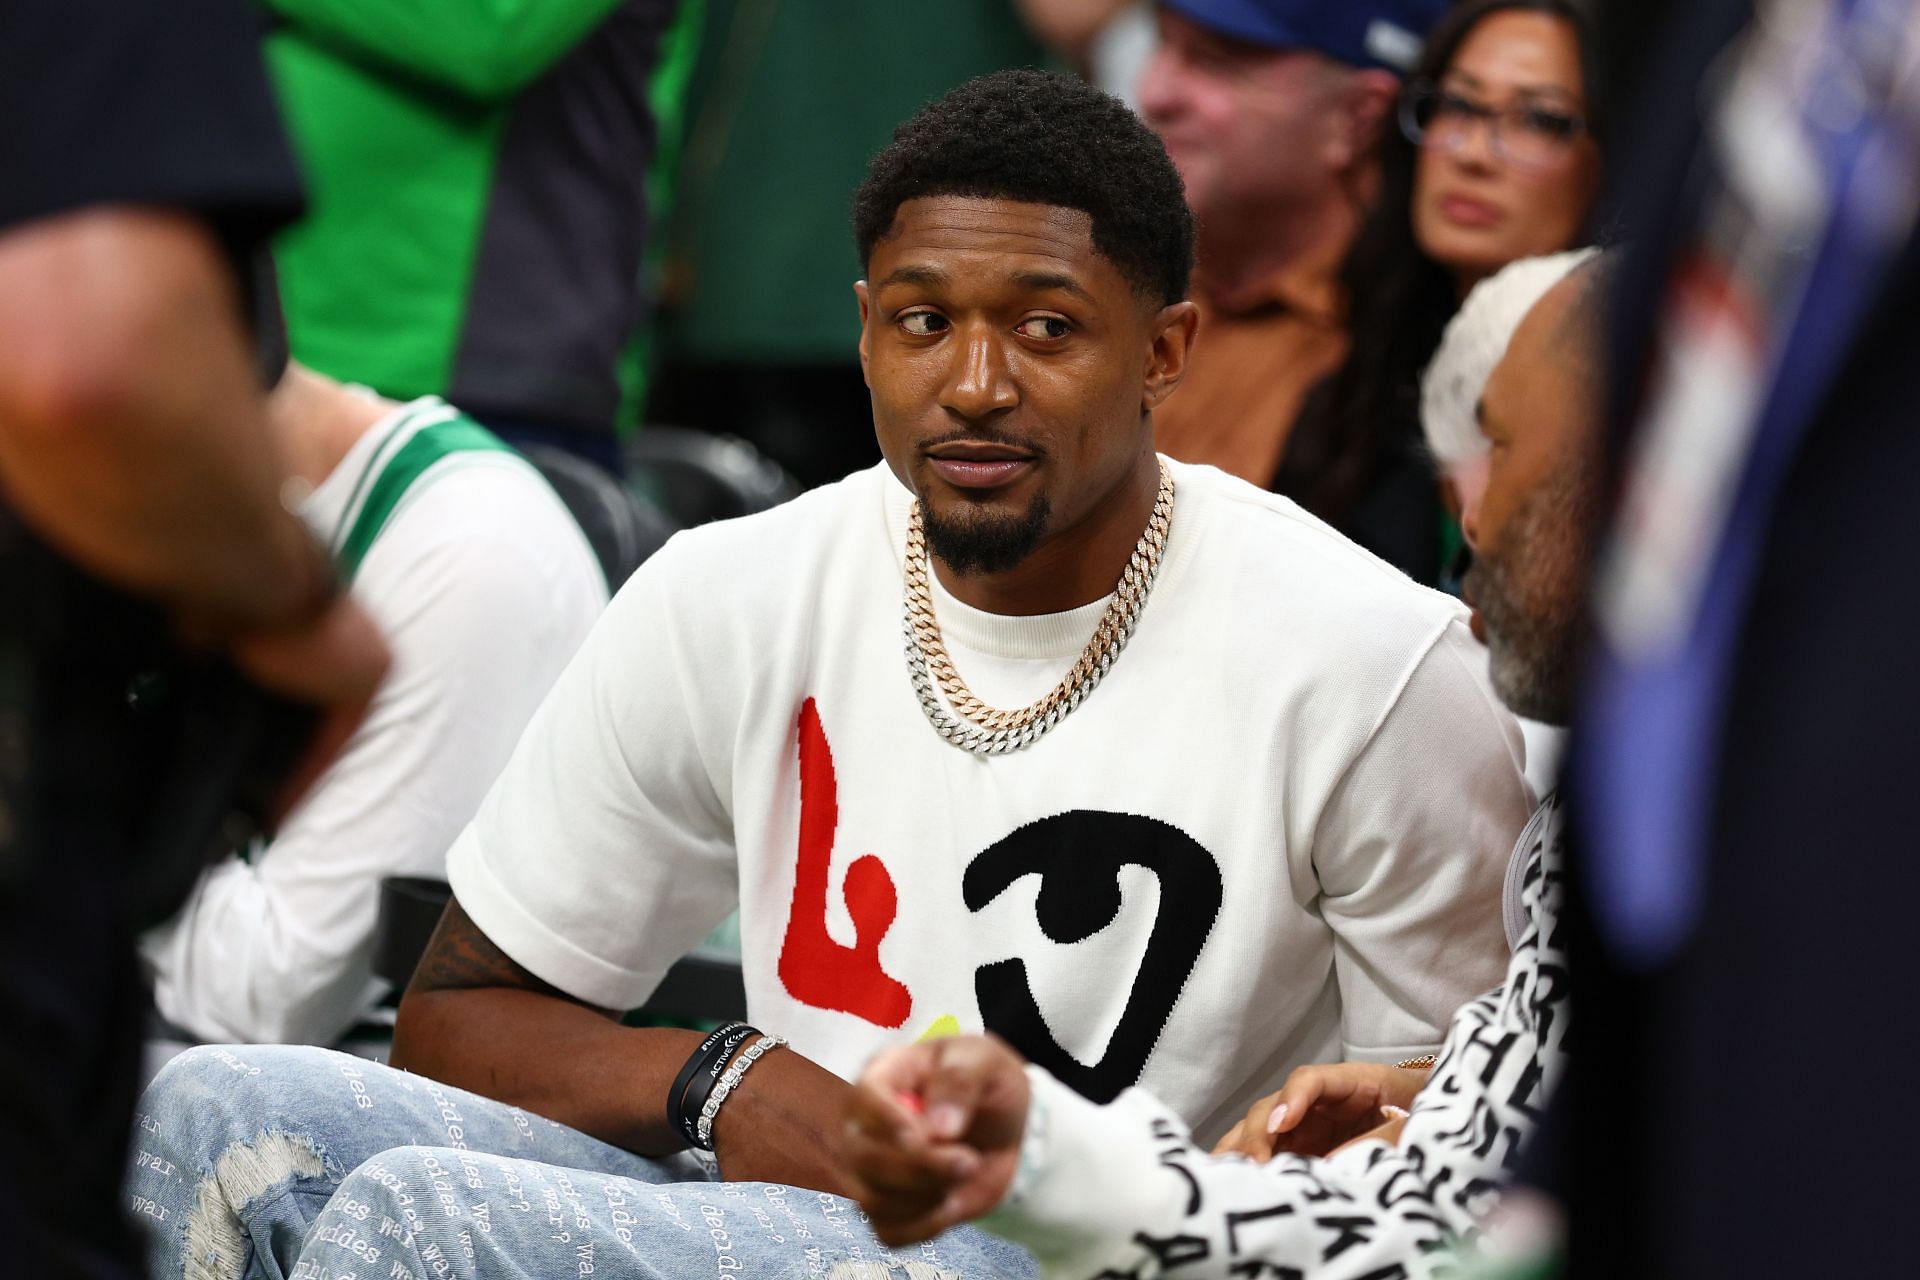 Bradley Beal of the Washington Wizards courtside for Game 4 of the 2022 NBA Finals.